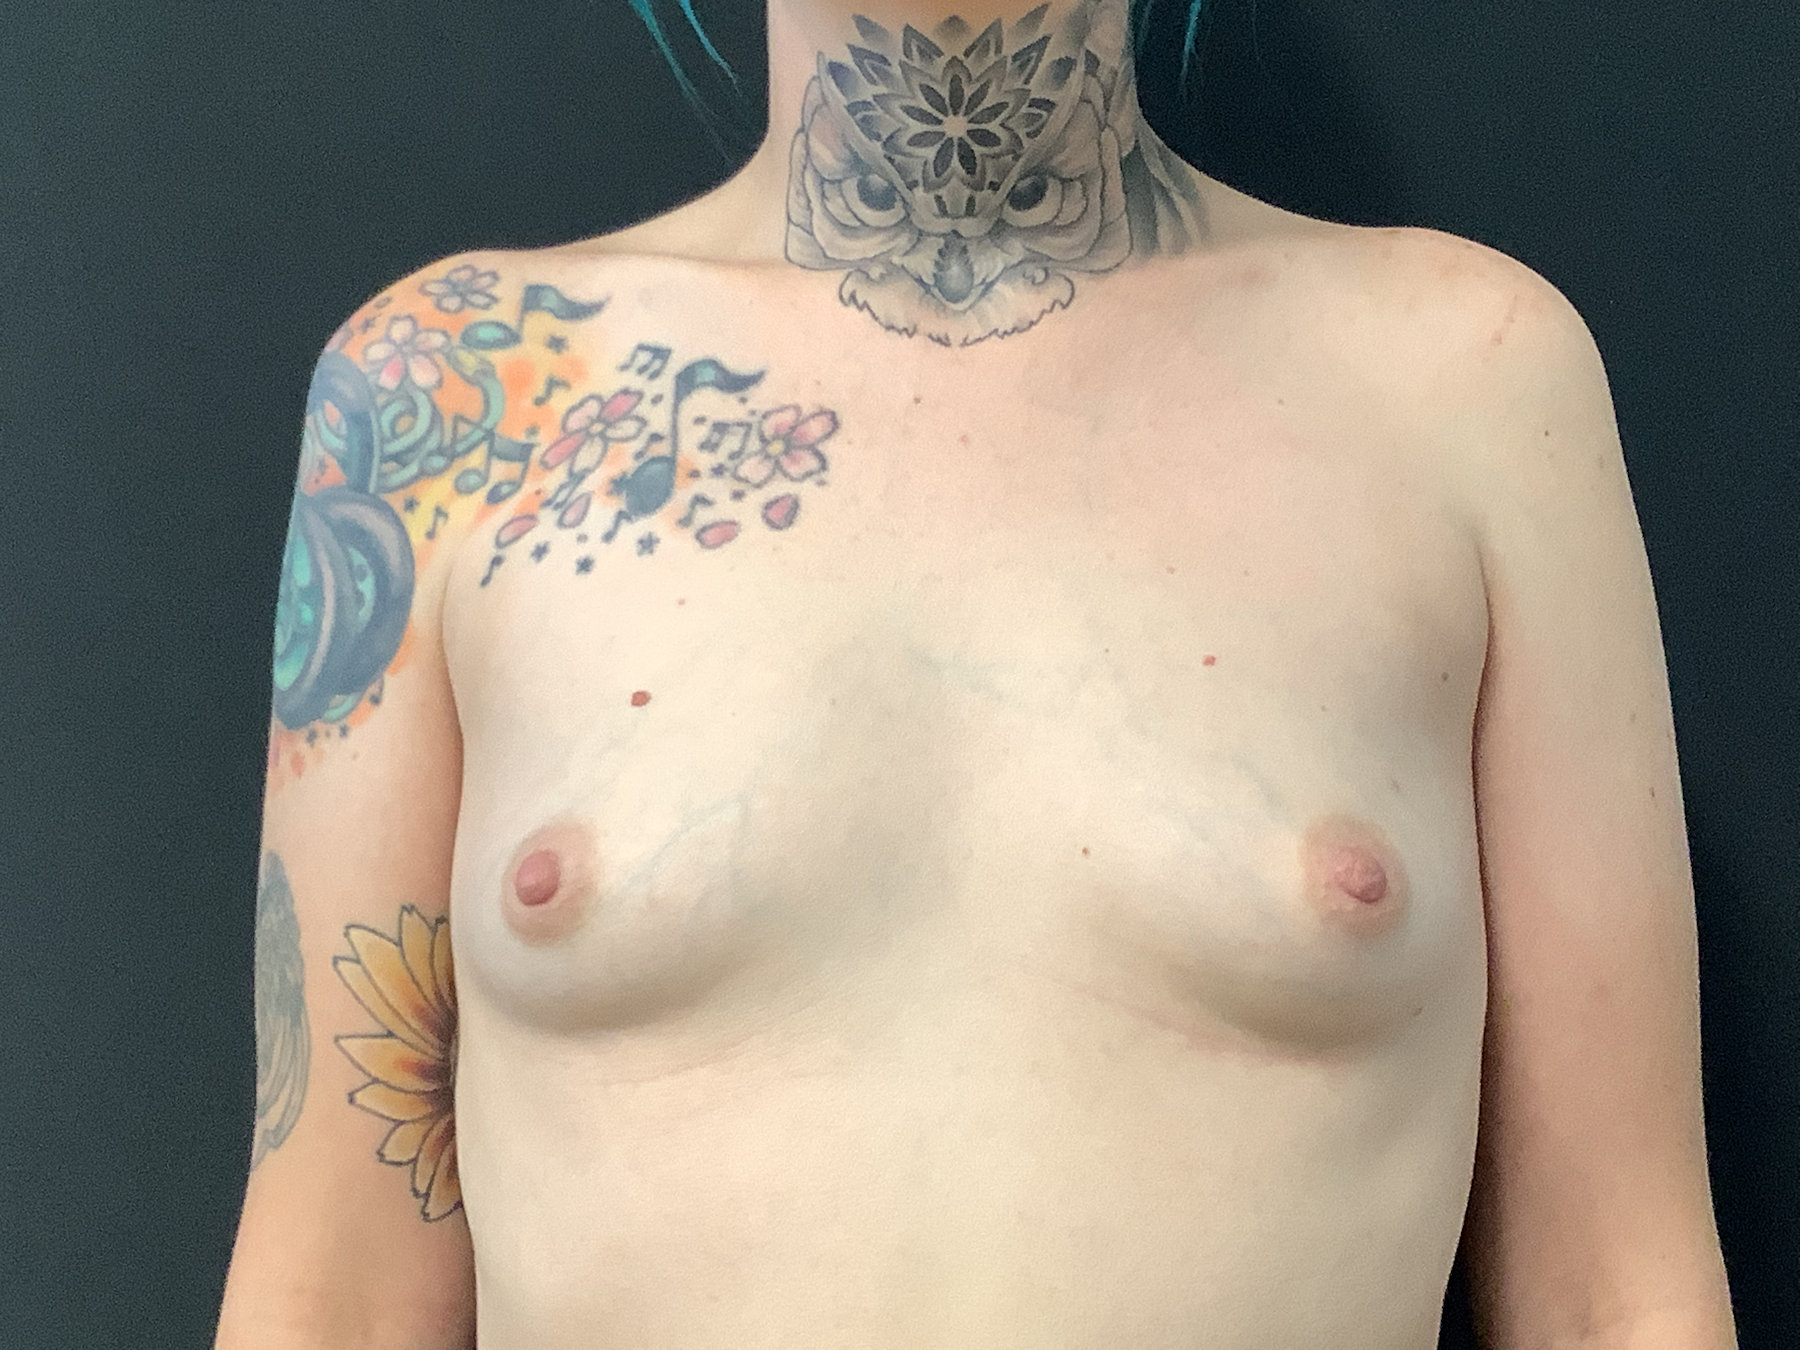 Reconstruction of bilateral breasts with placement of tissue expanders to silicone implants